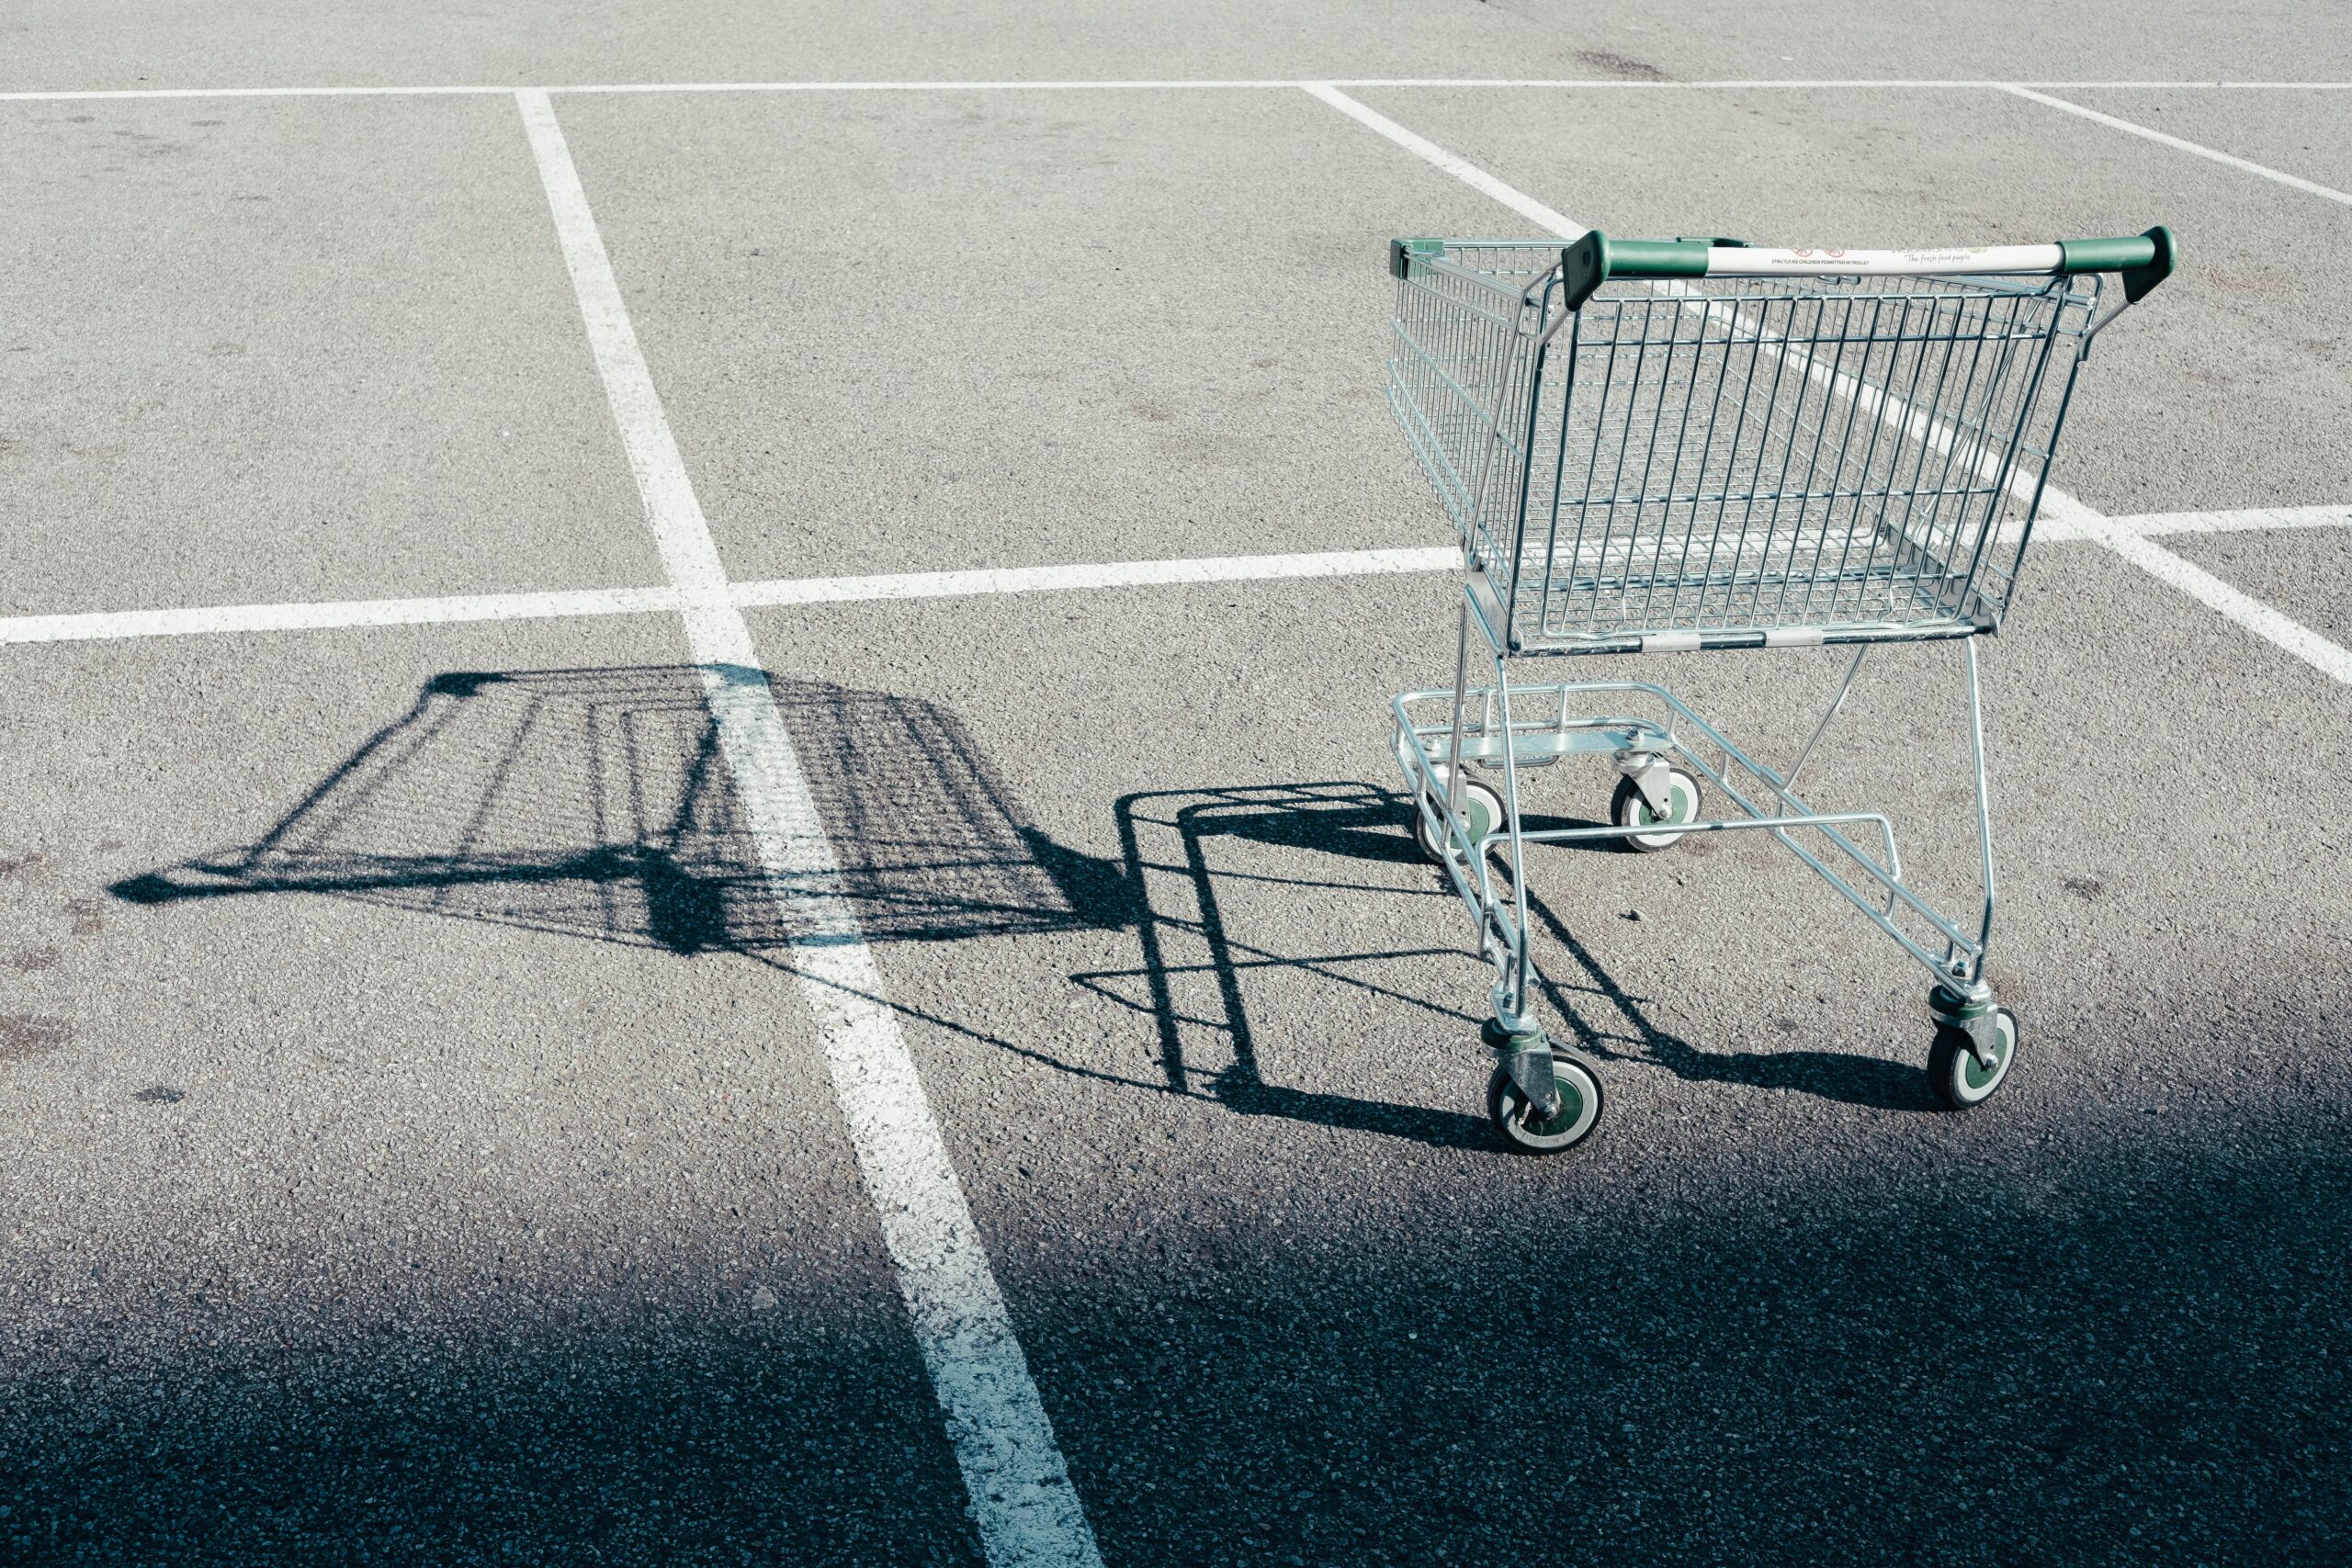 A decorative image of a supermarket trolley in a parking space of a car park, with the trolley casting a shadow over the ground.